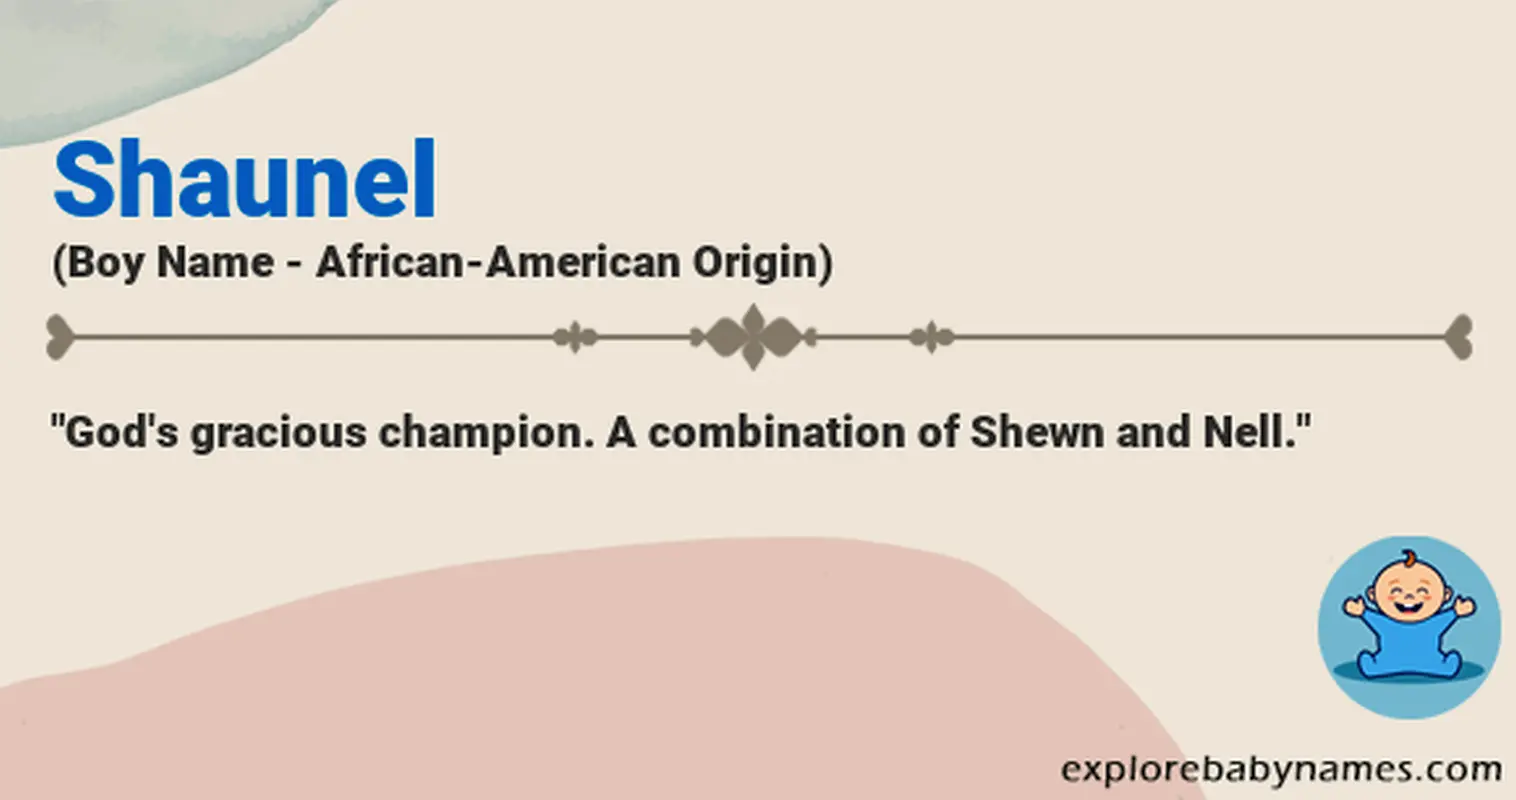 Meaning of Shaunel